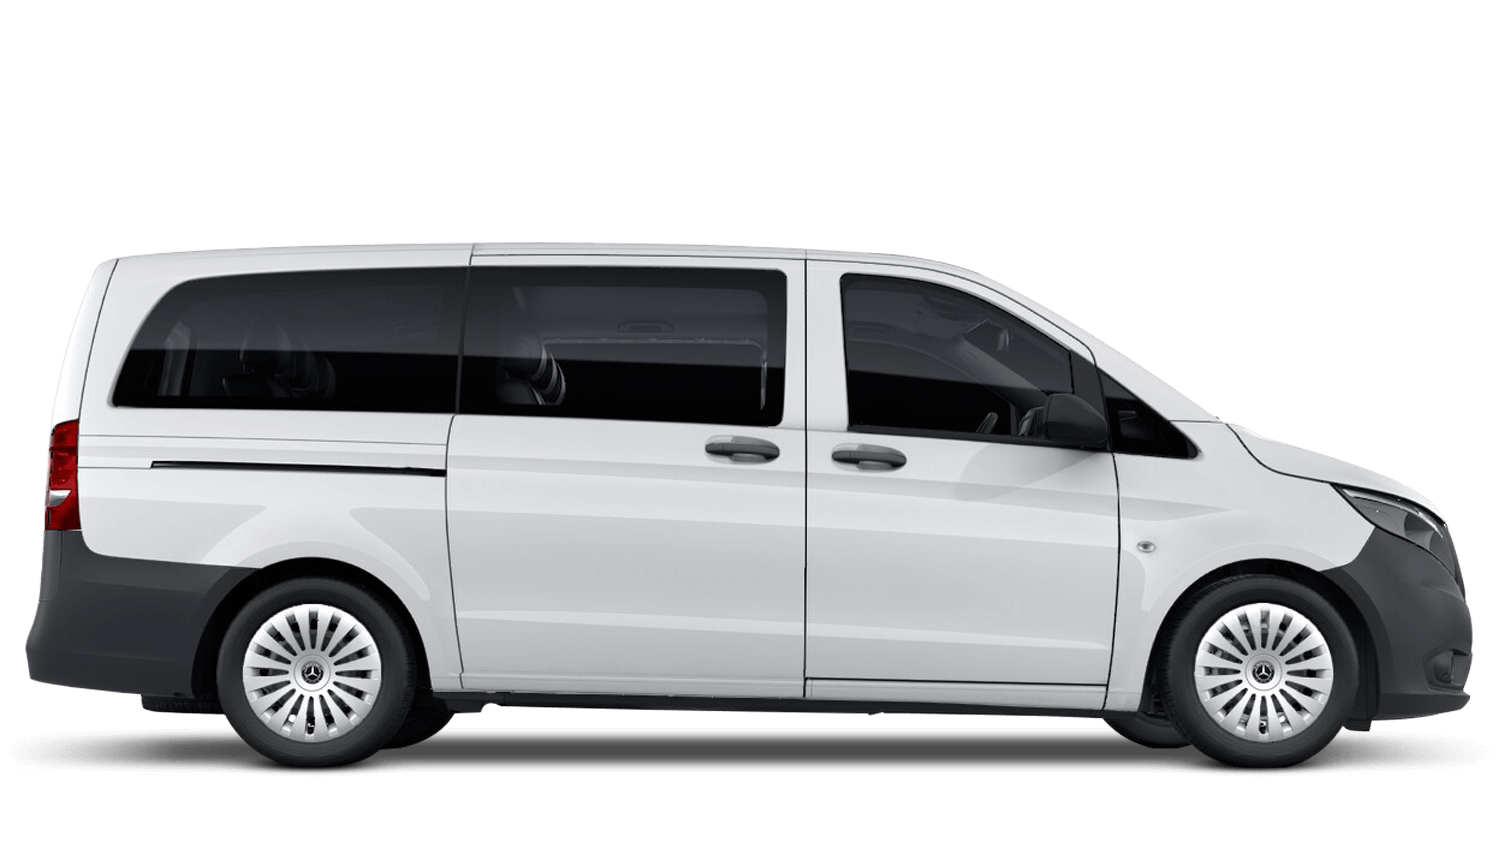 Mercedes-Benz Vito Driving, Engines & Performance